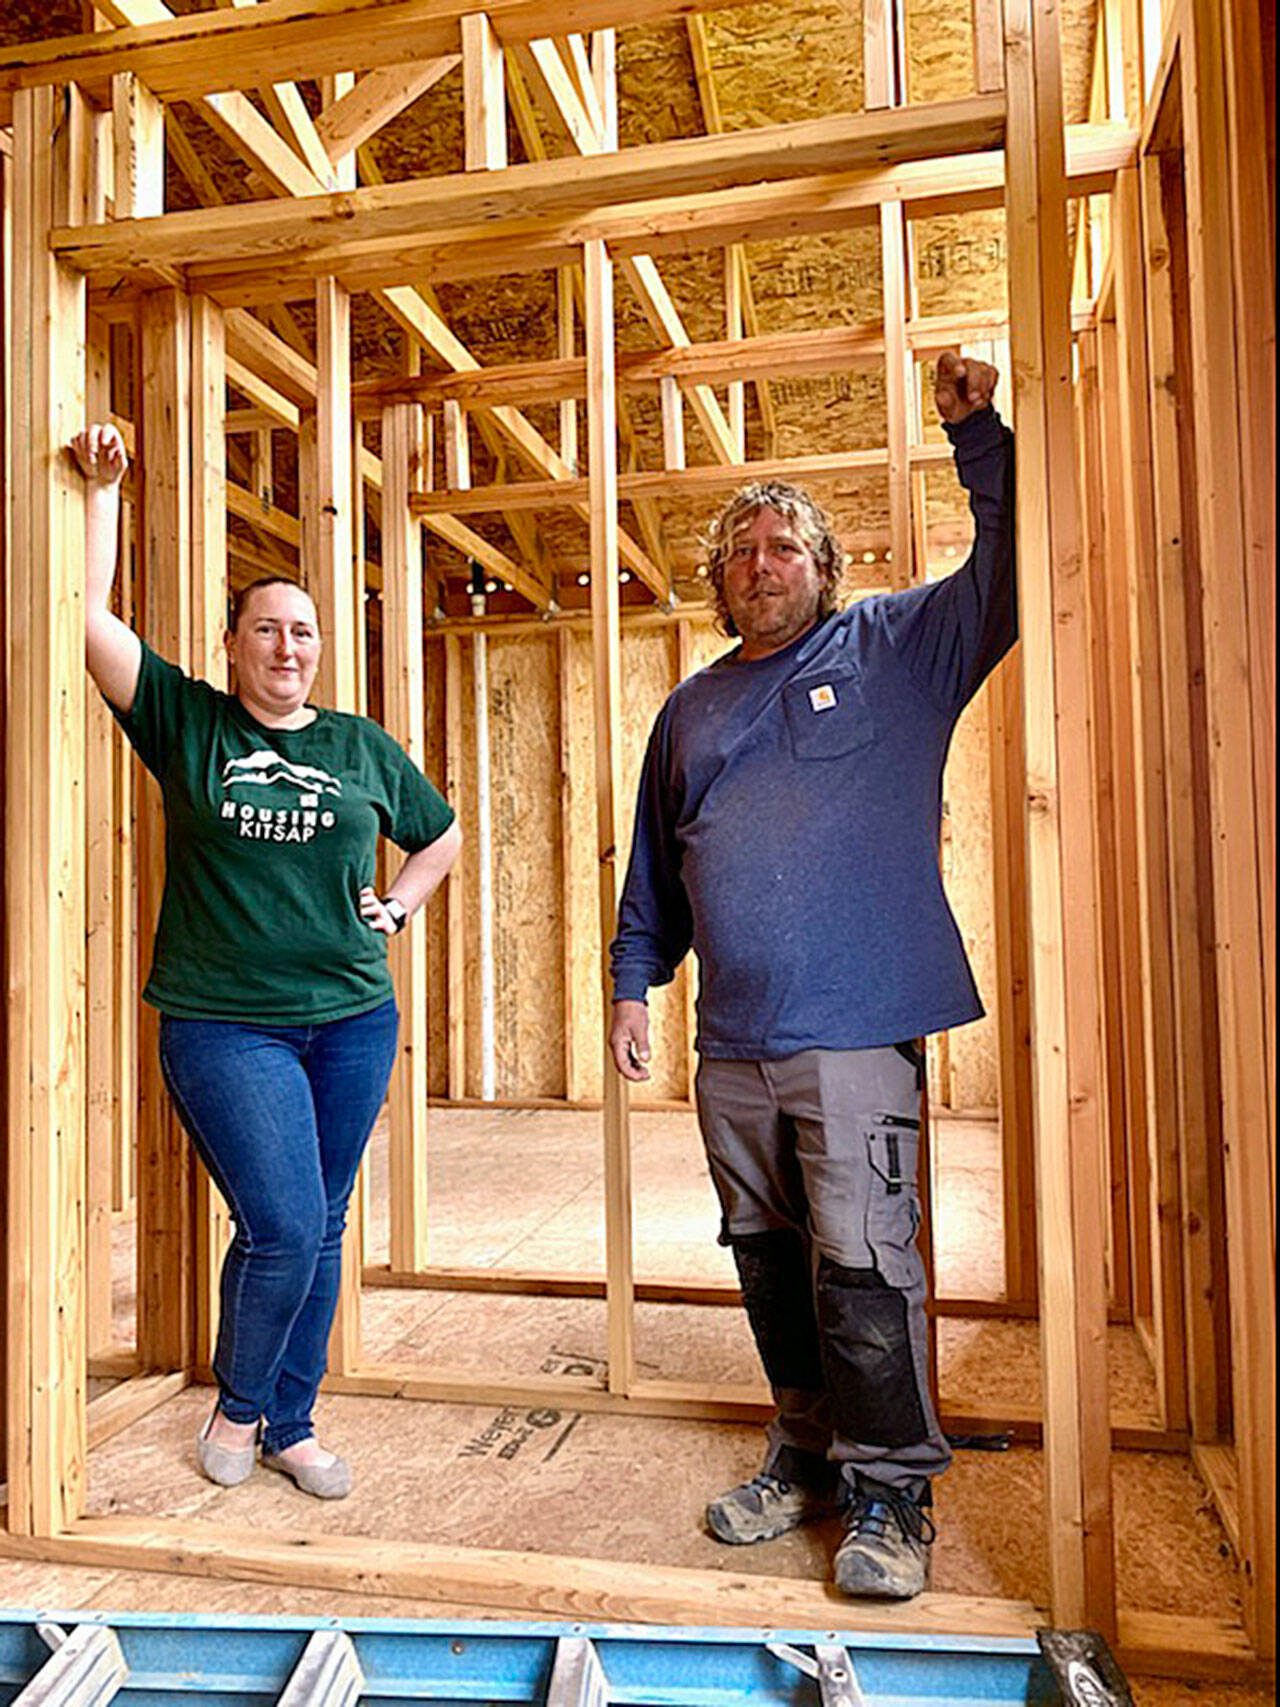 Breanna Littrell, marketing and outreach specialist with Housing Kitsap (left), and site supervisor Chris Evertz assist homeowners through the process of entering the Mutual Self-Help Housing program. (Bob Smith | Kitsap News Group)